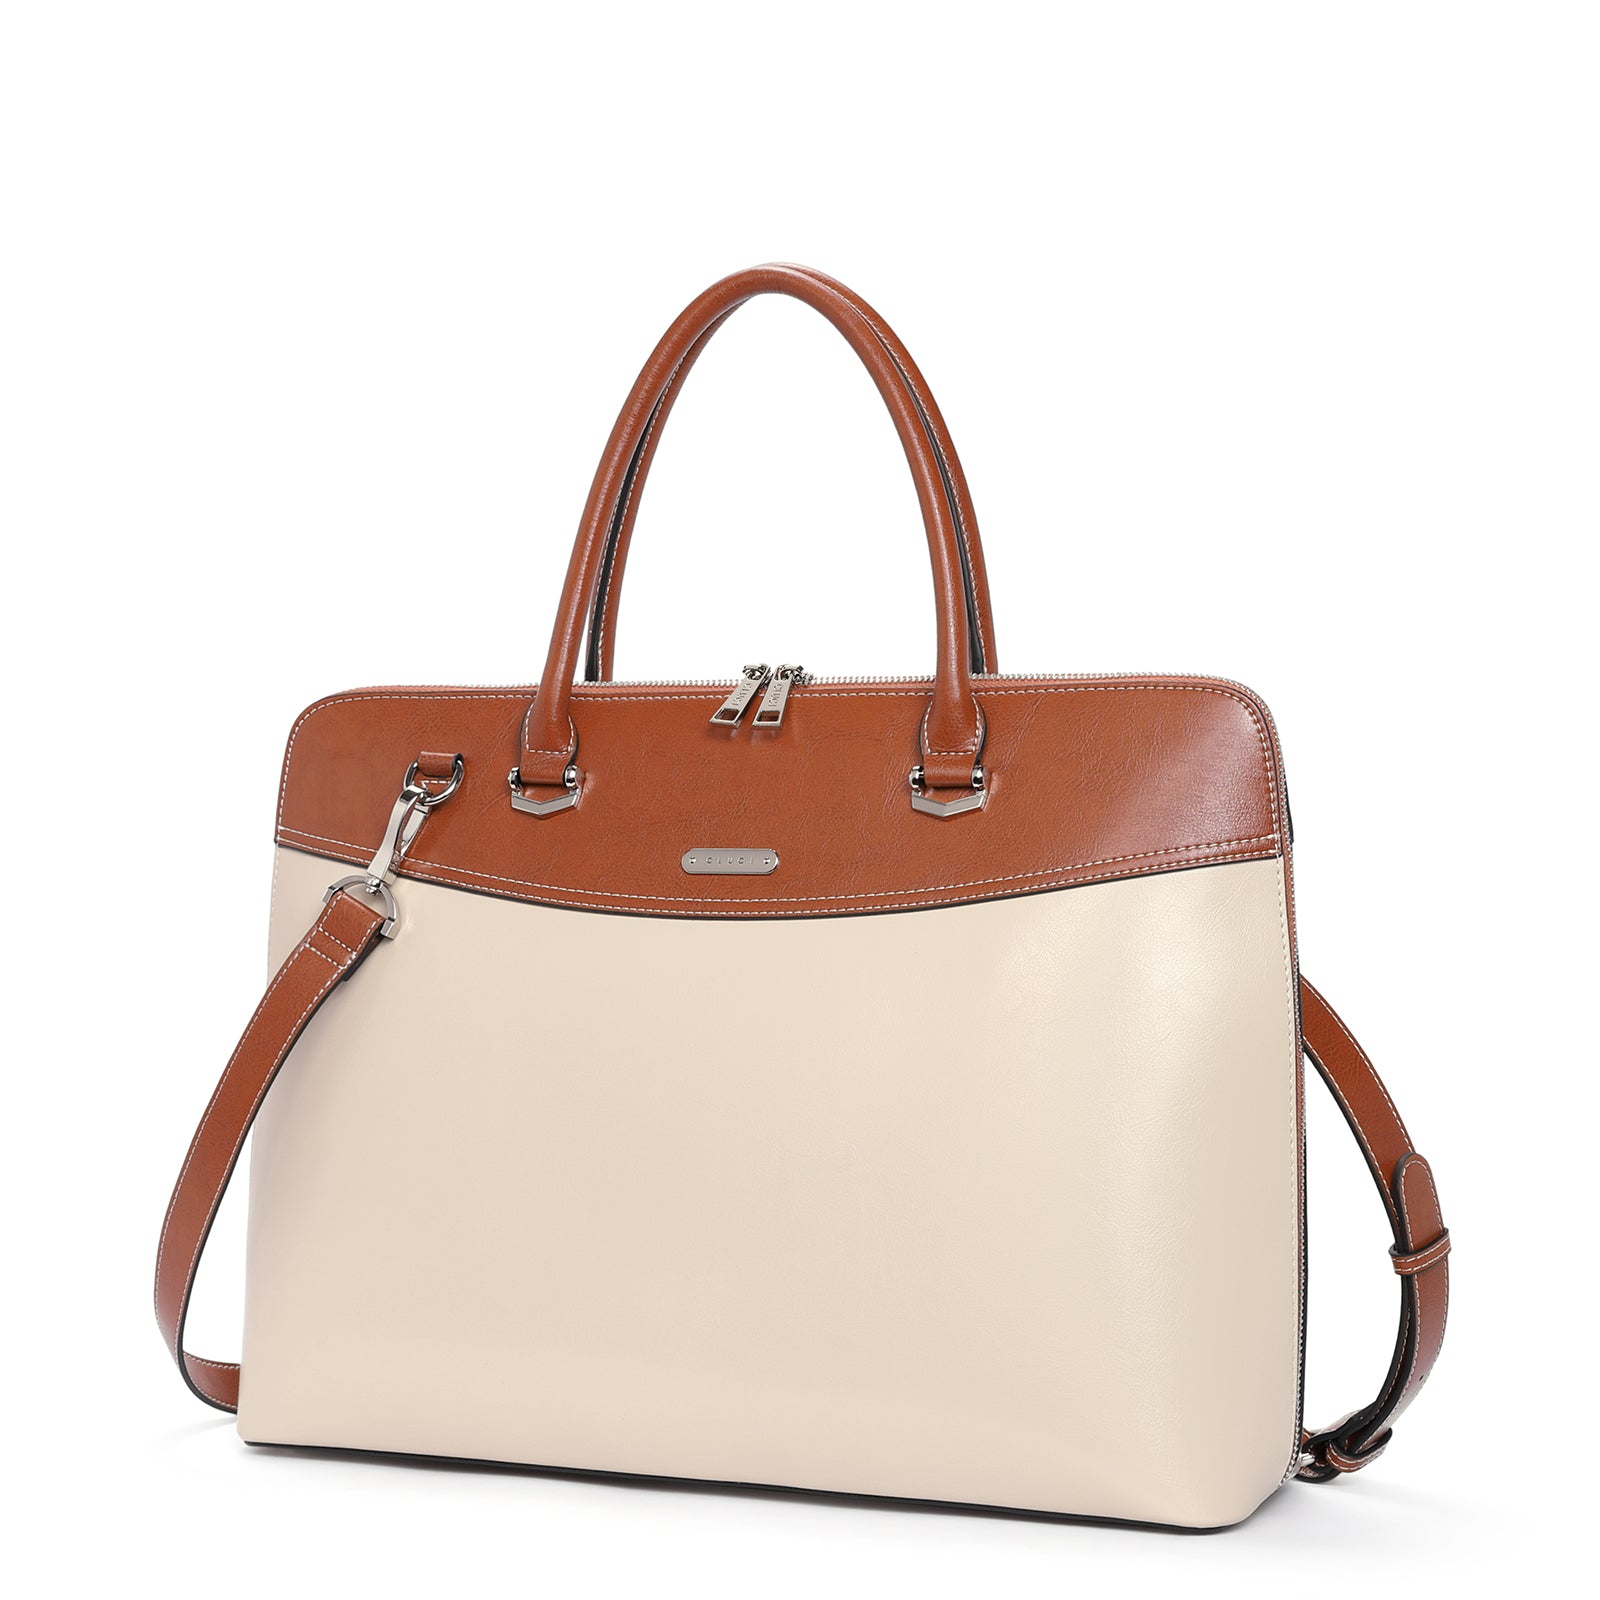 Claire Large Senior Leather Color Blocking Briefcase For Women